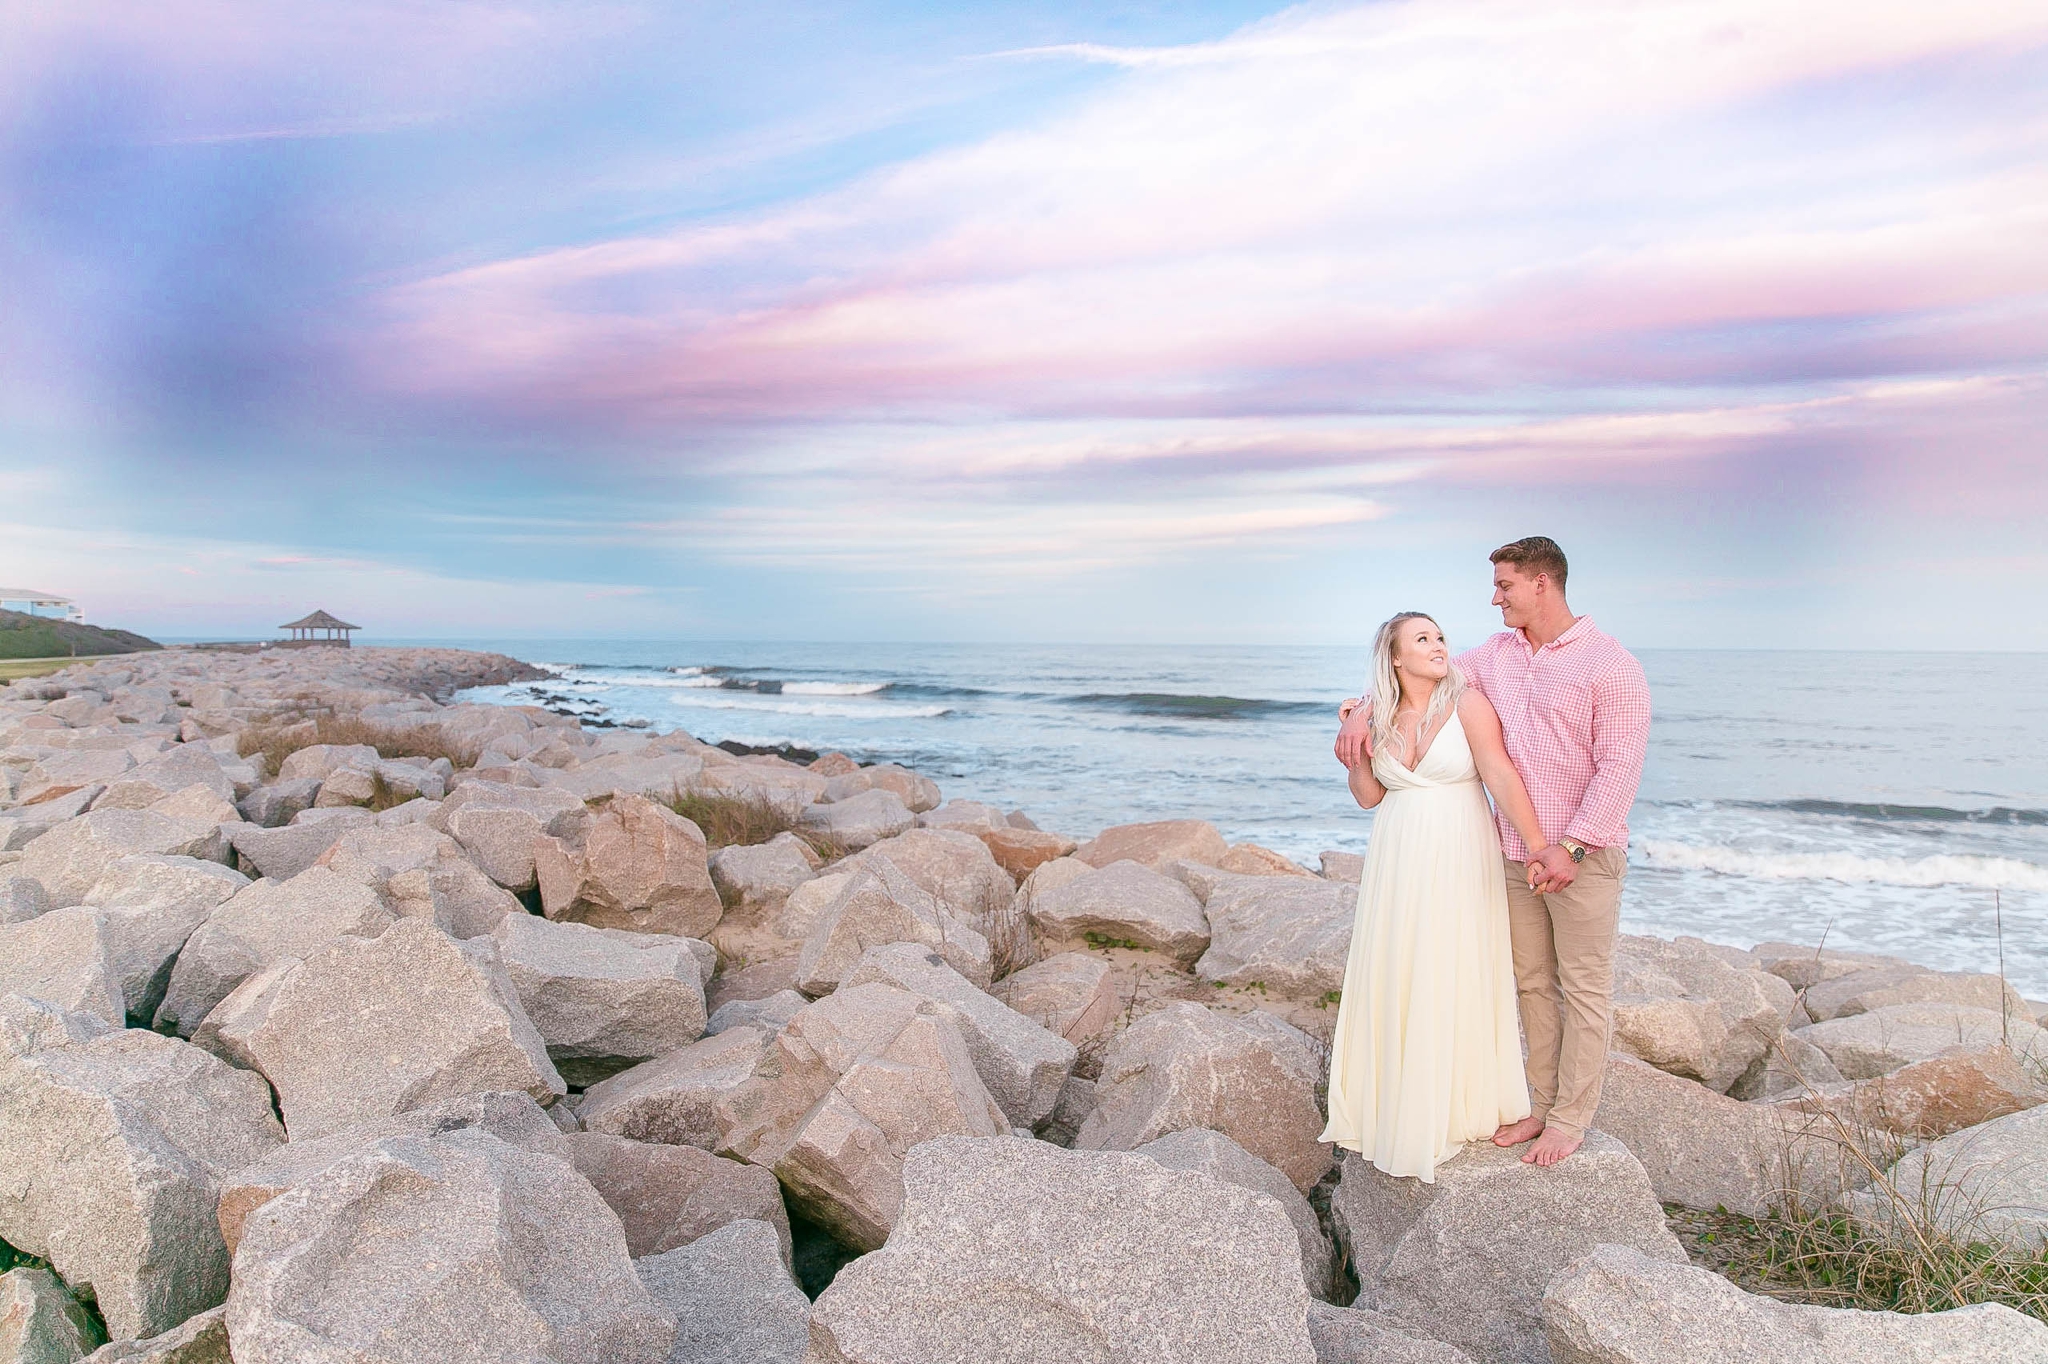  Engagement Photography Session at the beach on top of rocks with a cotton candy sky in the background - couple is standing up - girl is wearing a white flowy maxi dress from lulus - Honolulu Oahu Hawaii Wedding Photographer - Johanna Dye 